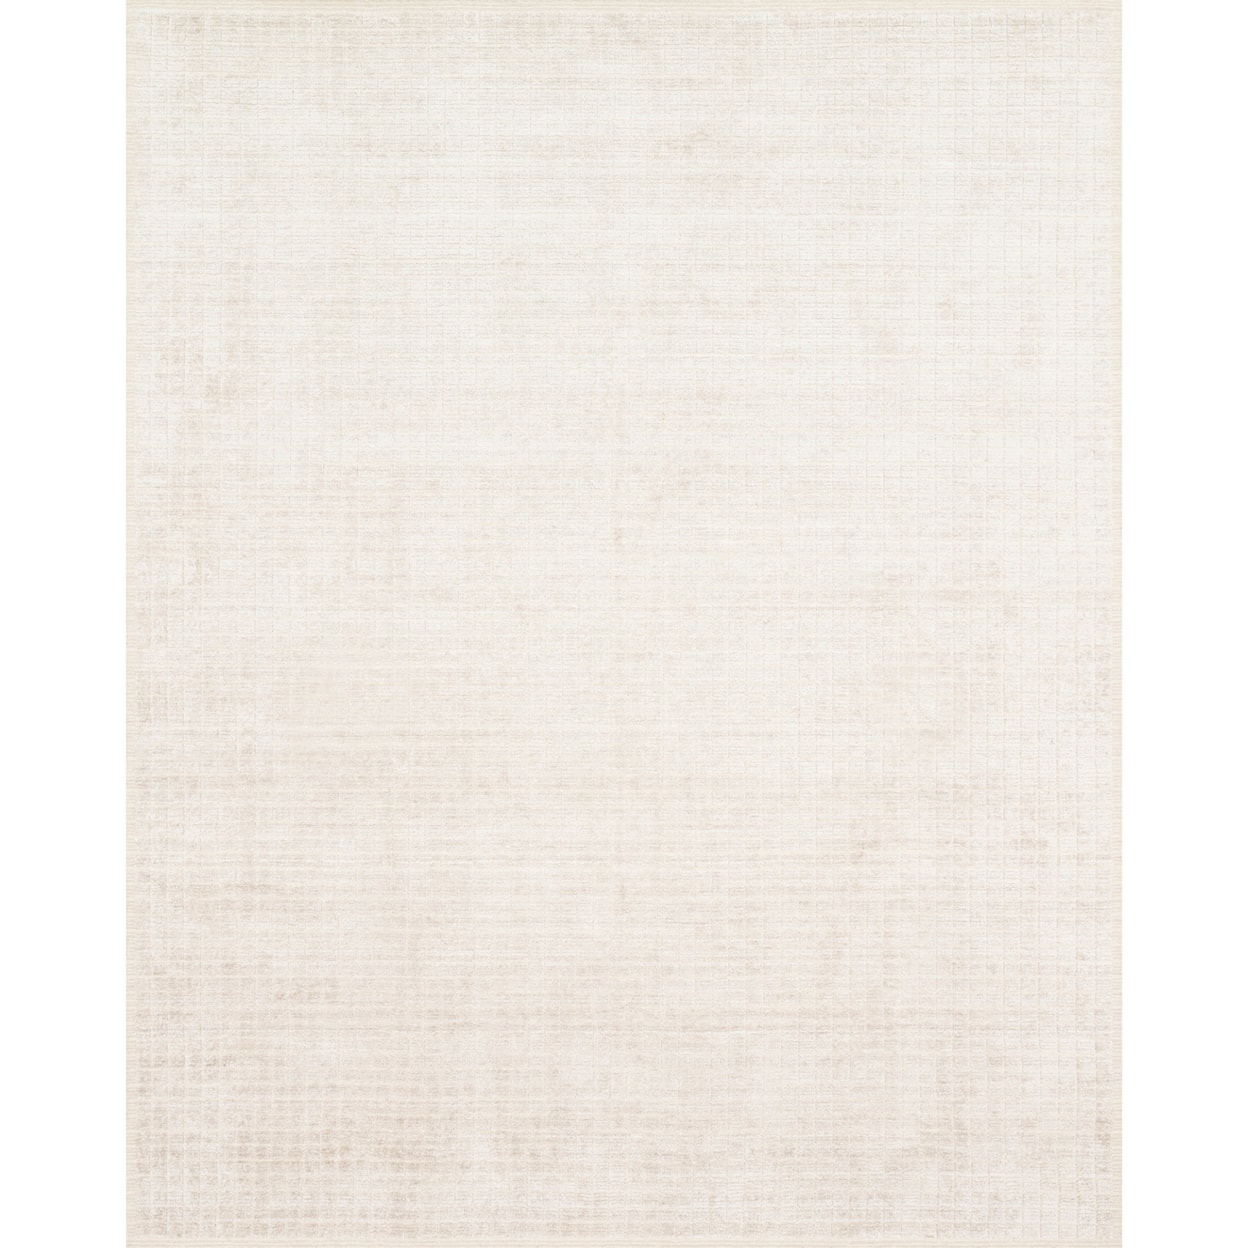 Loloi Rugs Beverly 8'6" x 11'6" Natural Rug